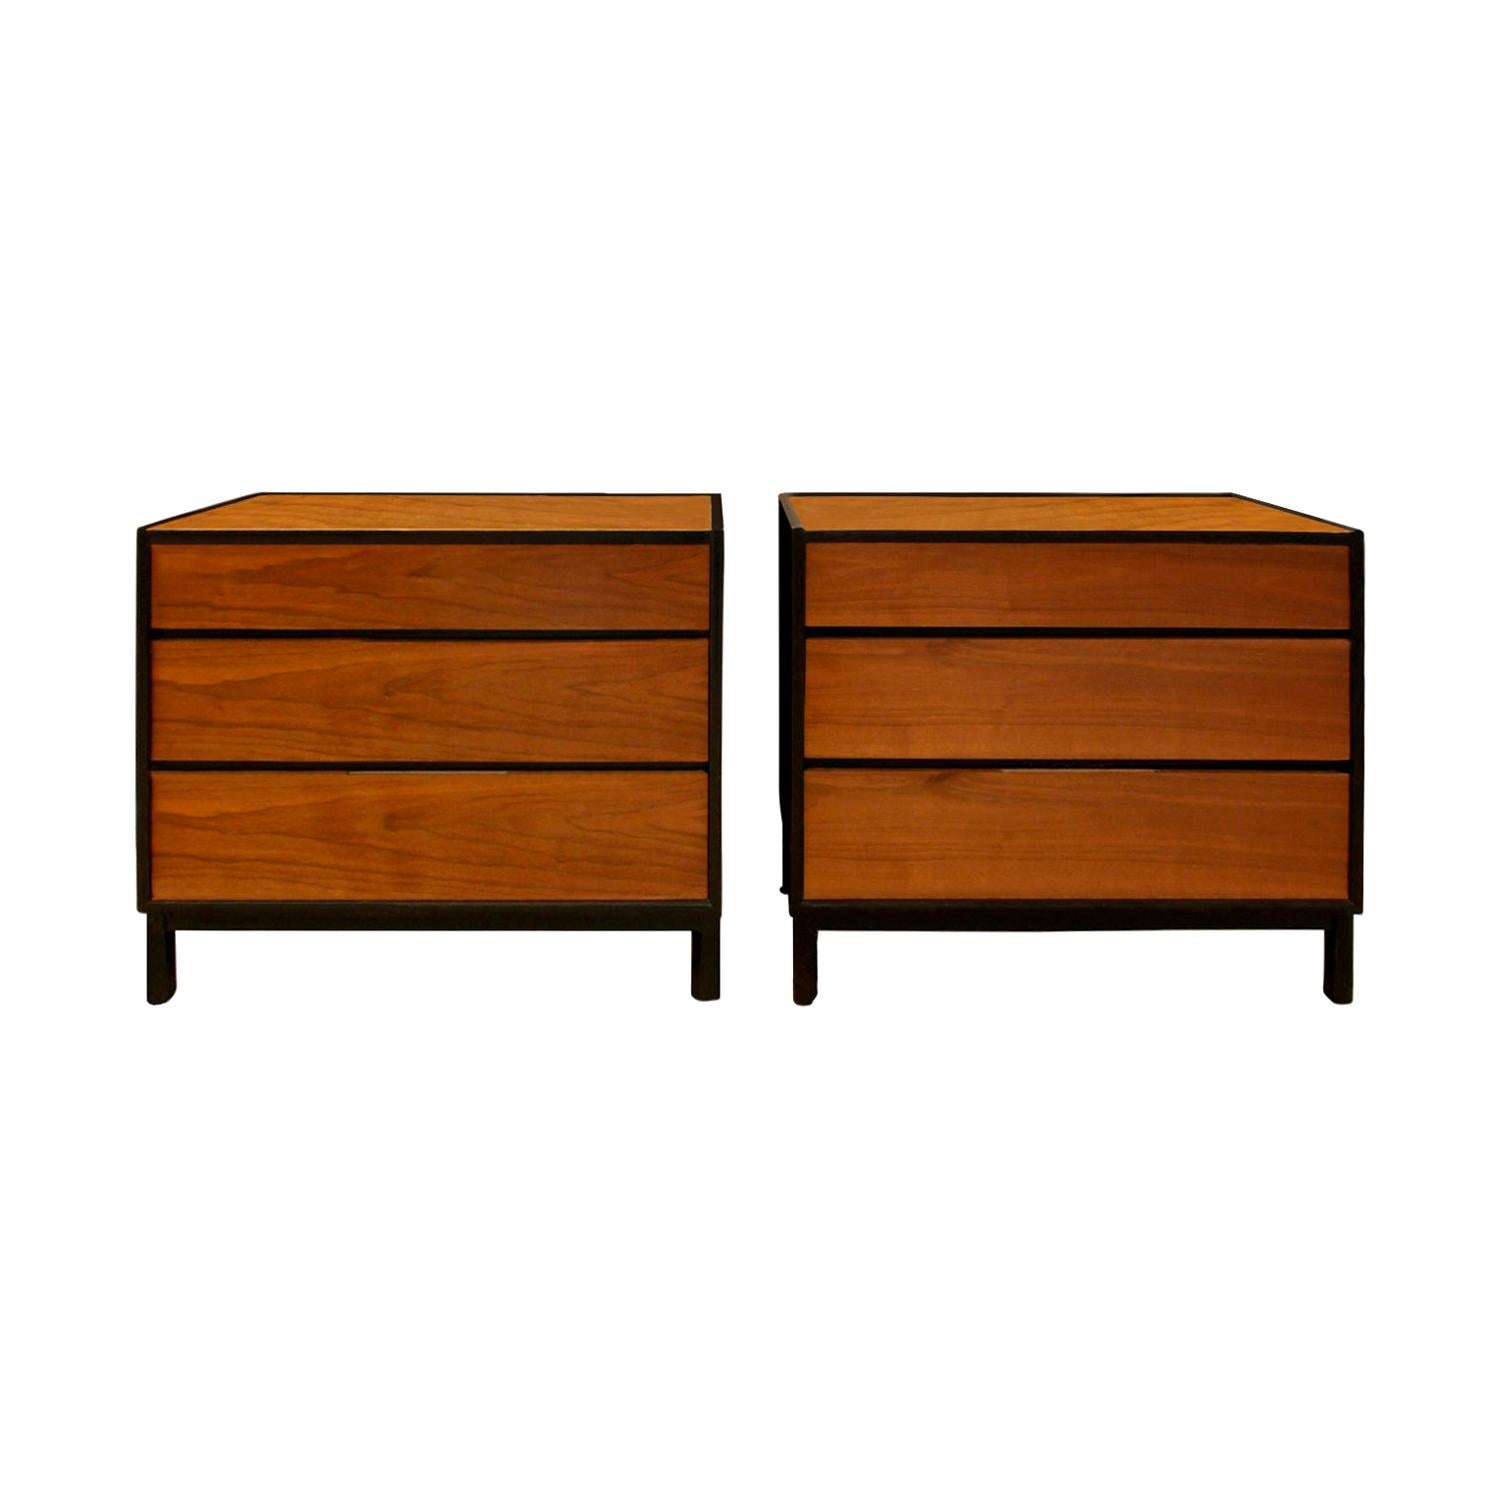 Edward Wormley Pair of Bedside Tables/Chests in Teak and Mahogany 1950s ‘Signed’